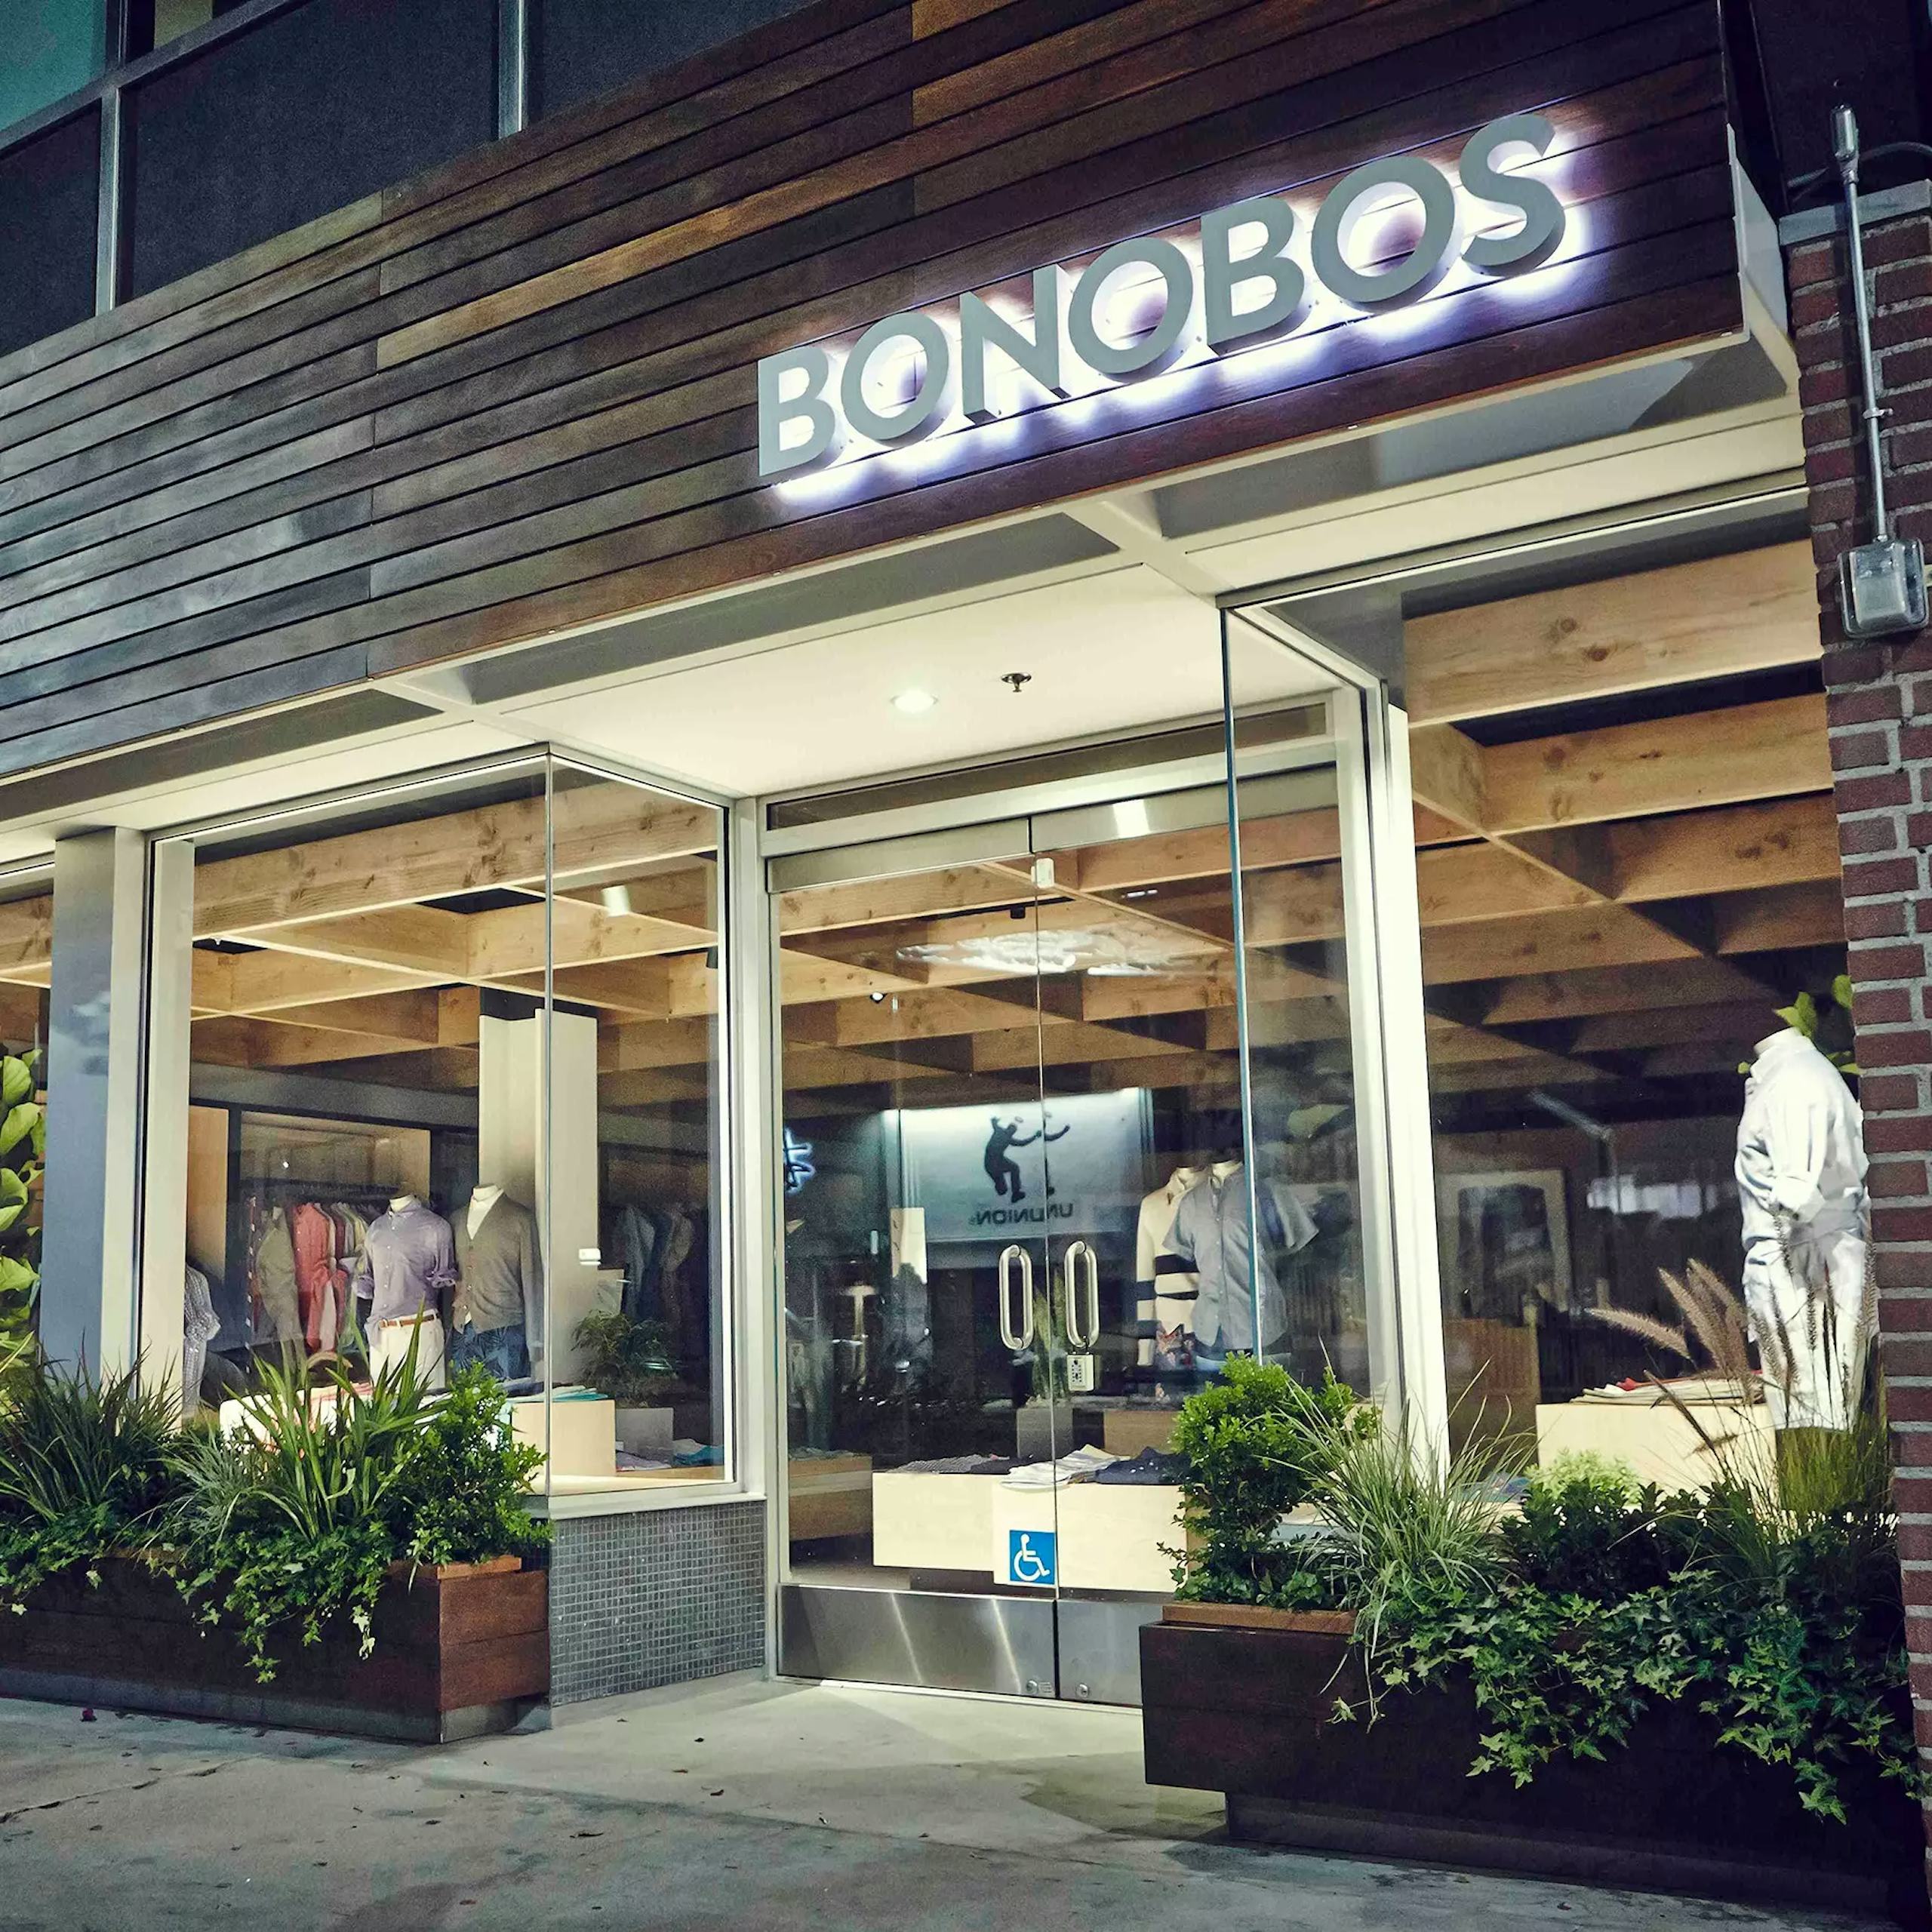 Image of Bonobos store in La Brea, Los Angeles. Bonobos store has glass windows which show the inside of the store. Inside are casual shirts, pants, suits and blazers. 